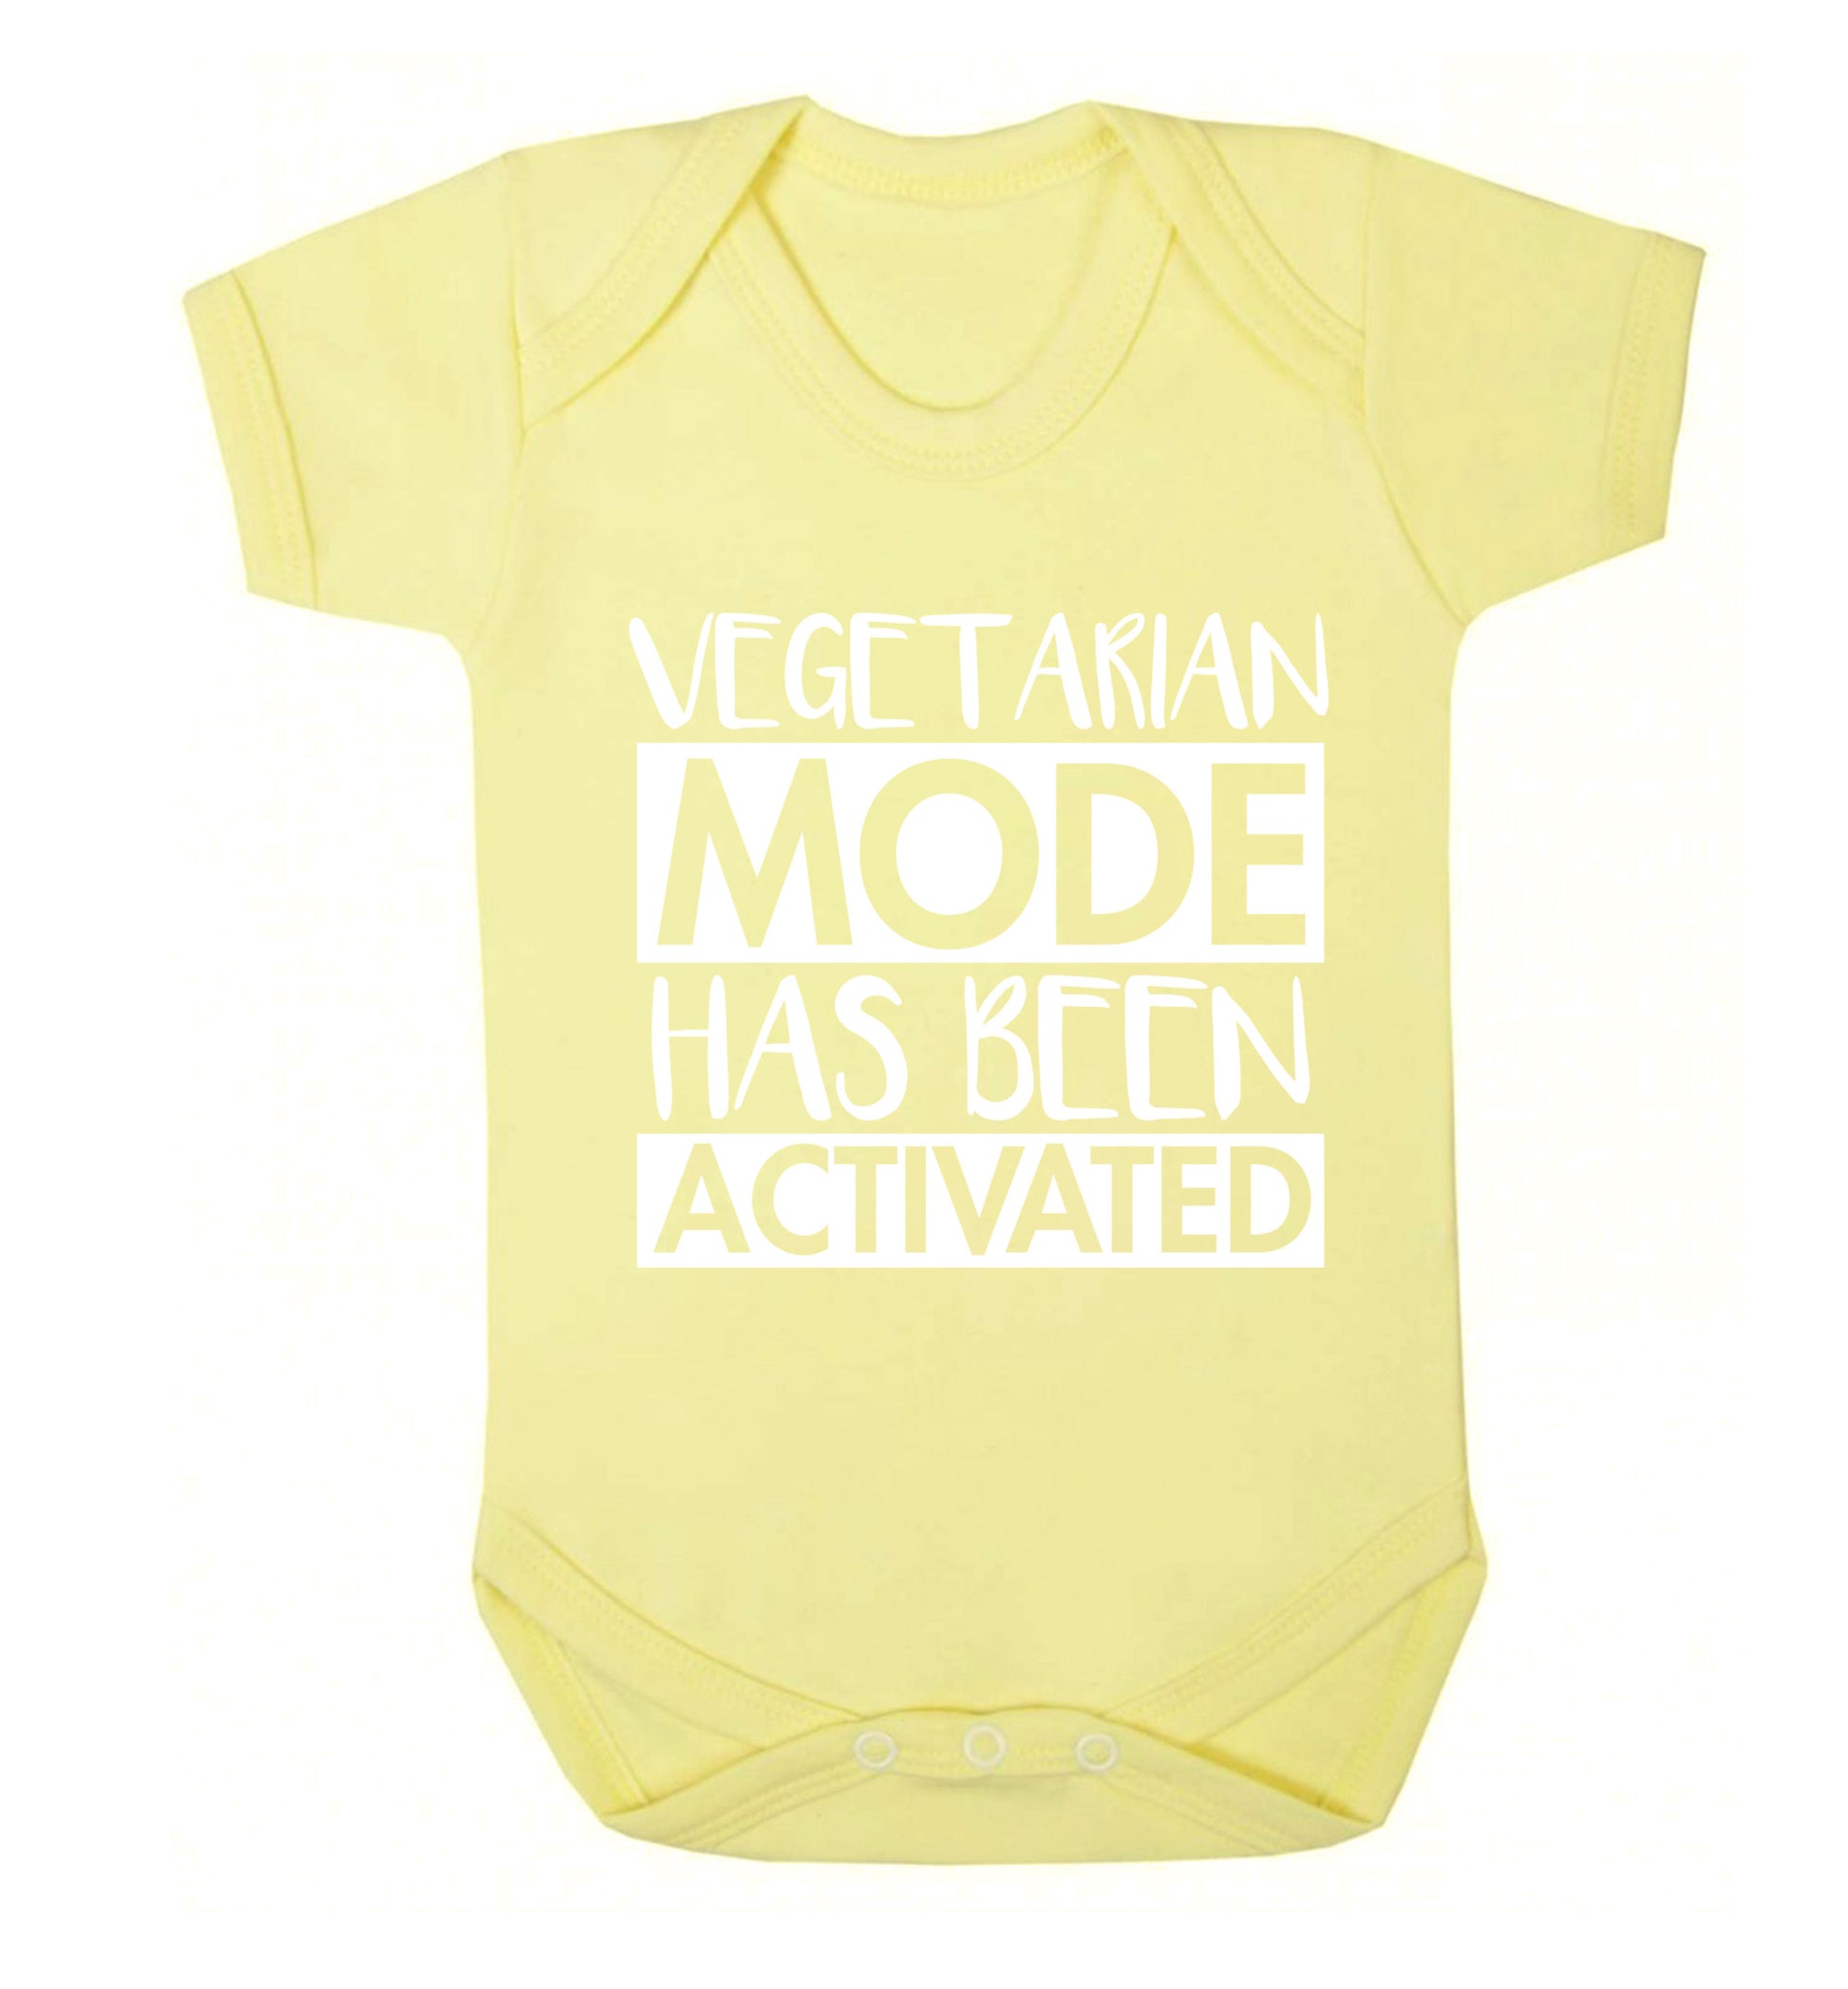 Vegetarian mode activated Baby Vest pale yellow 18-24 months